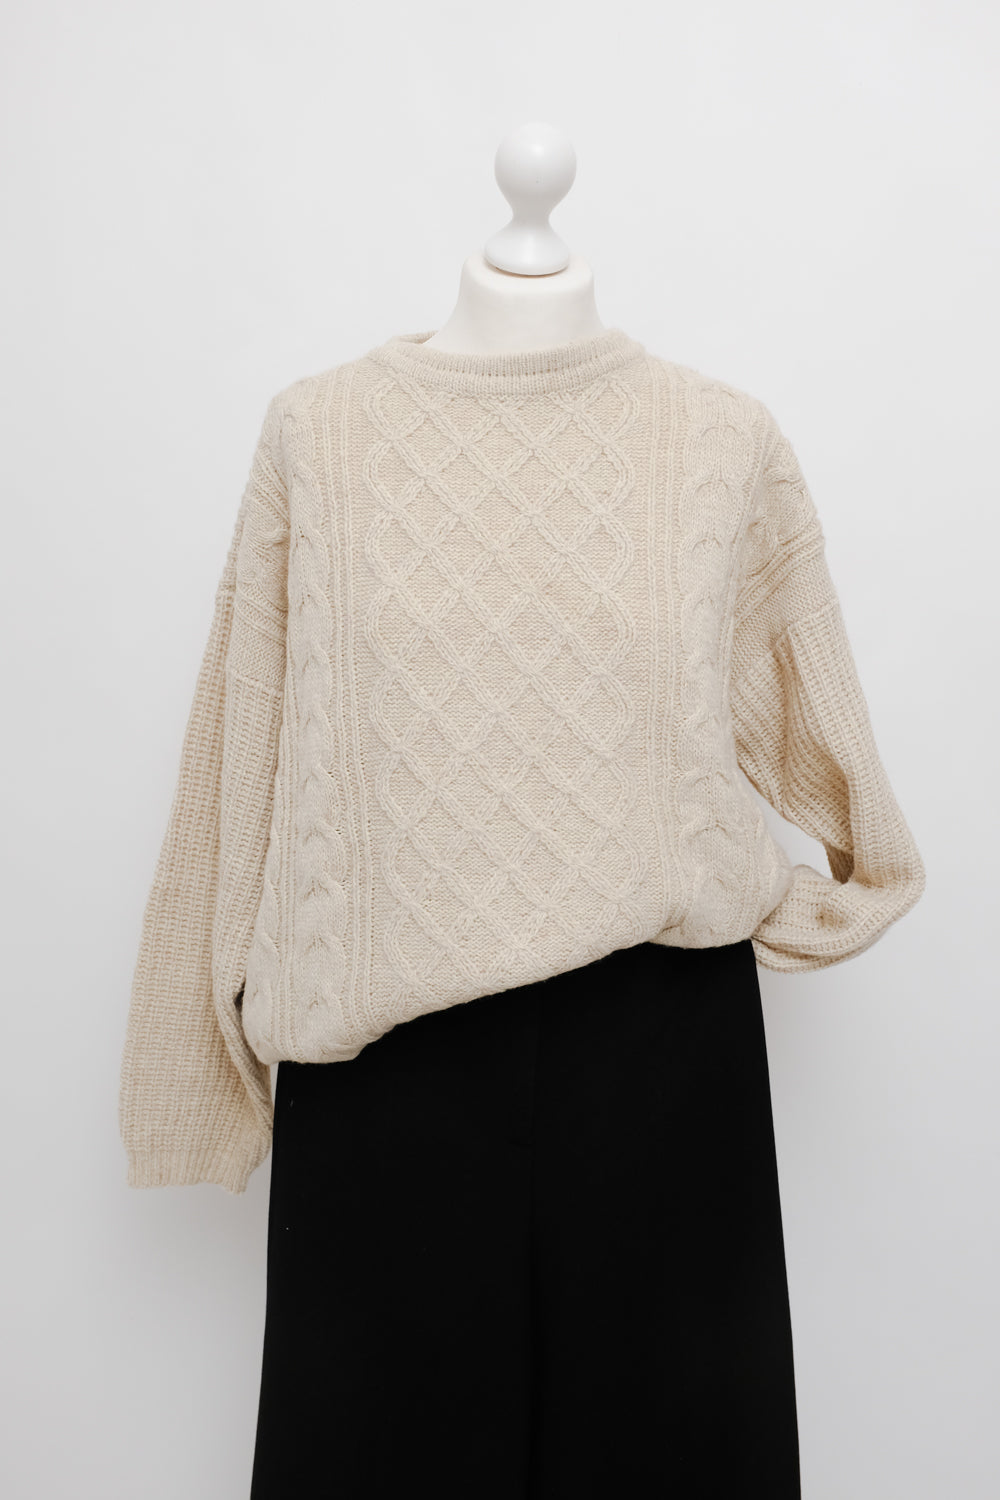 CLASSY SAND CABLE KNIT CHUNKY SWEATER